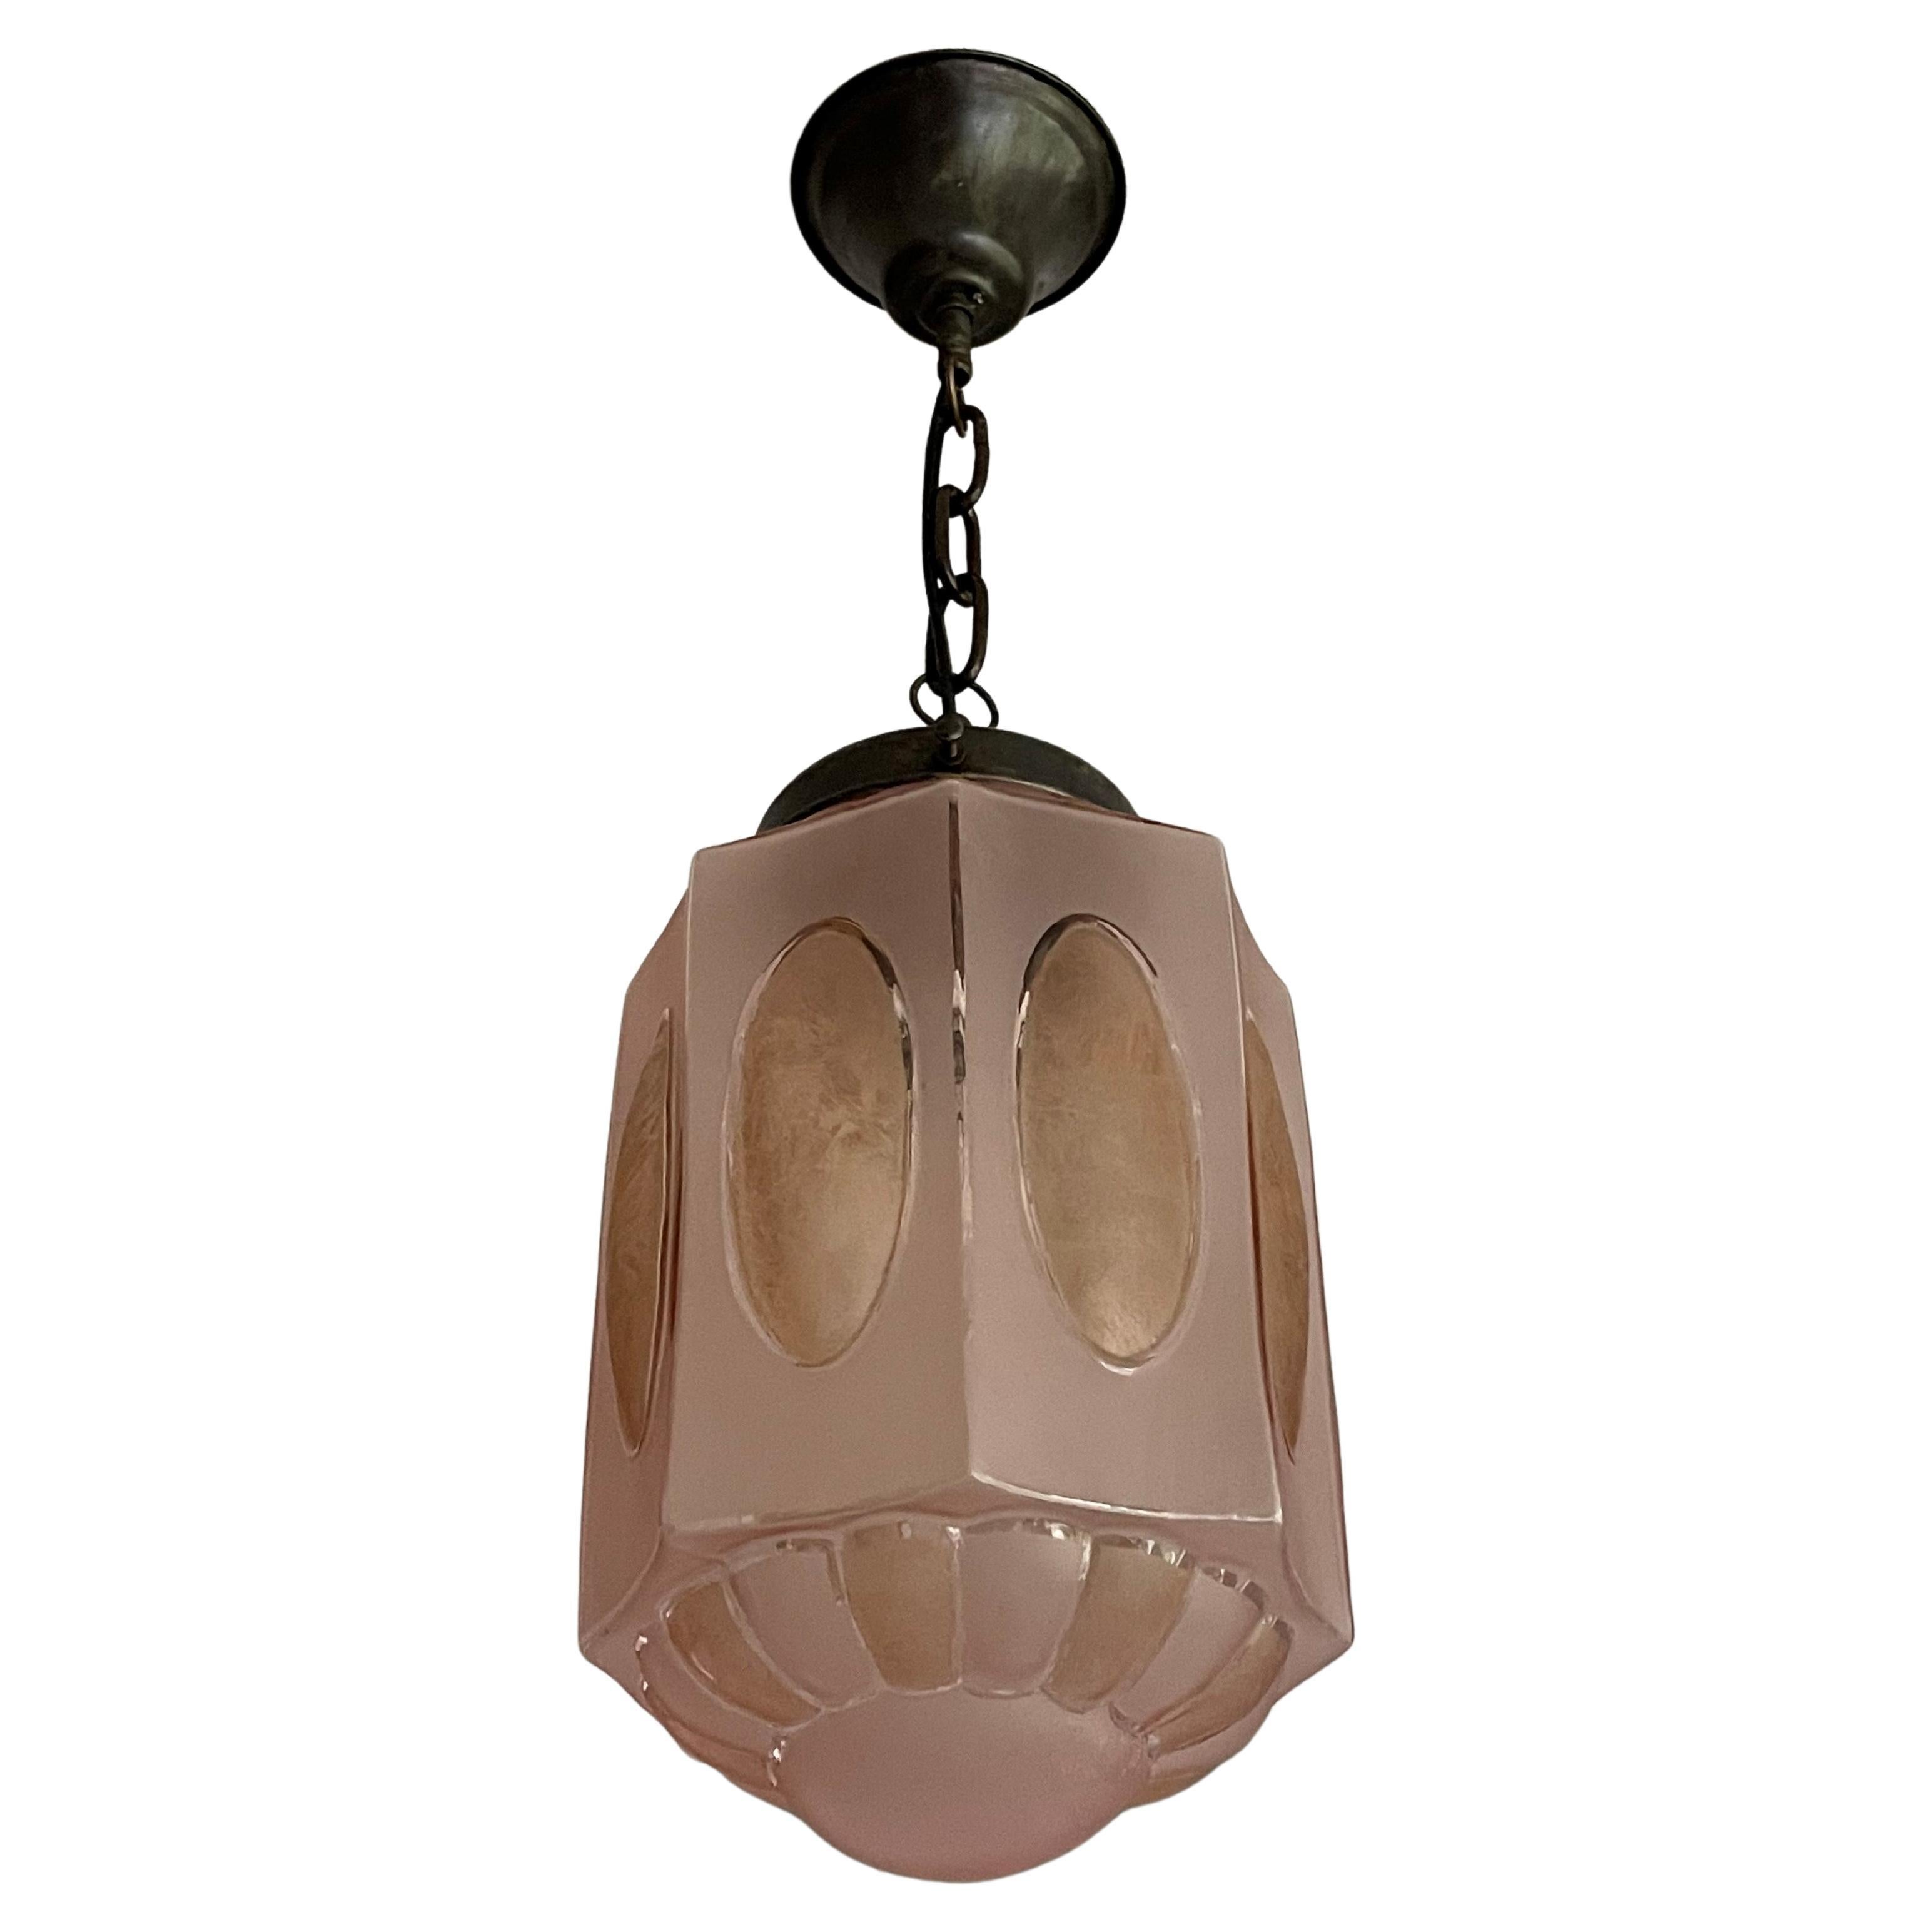 Rare Art Deco Pendant Light Fixture w. Octagonal Satinated & Frosted Glass Shade For Sale